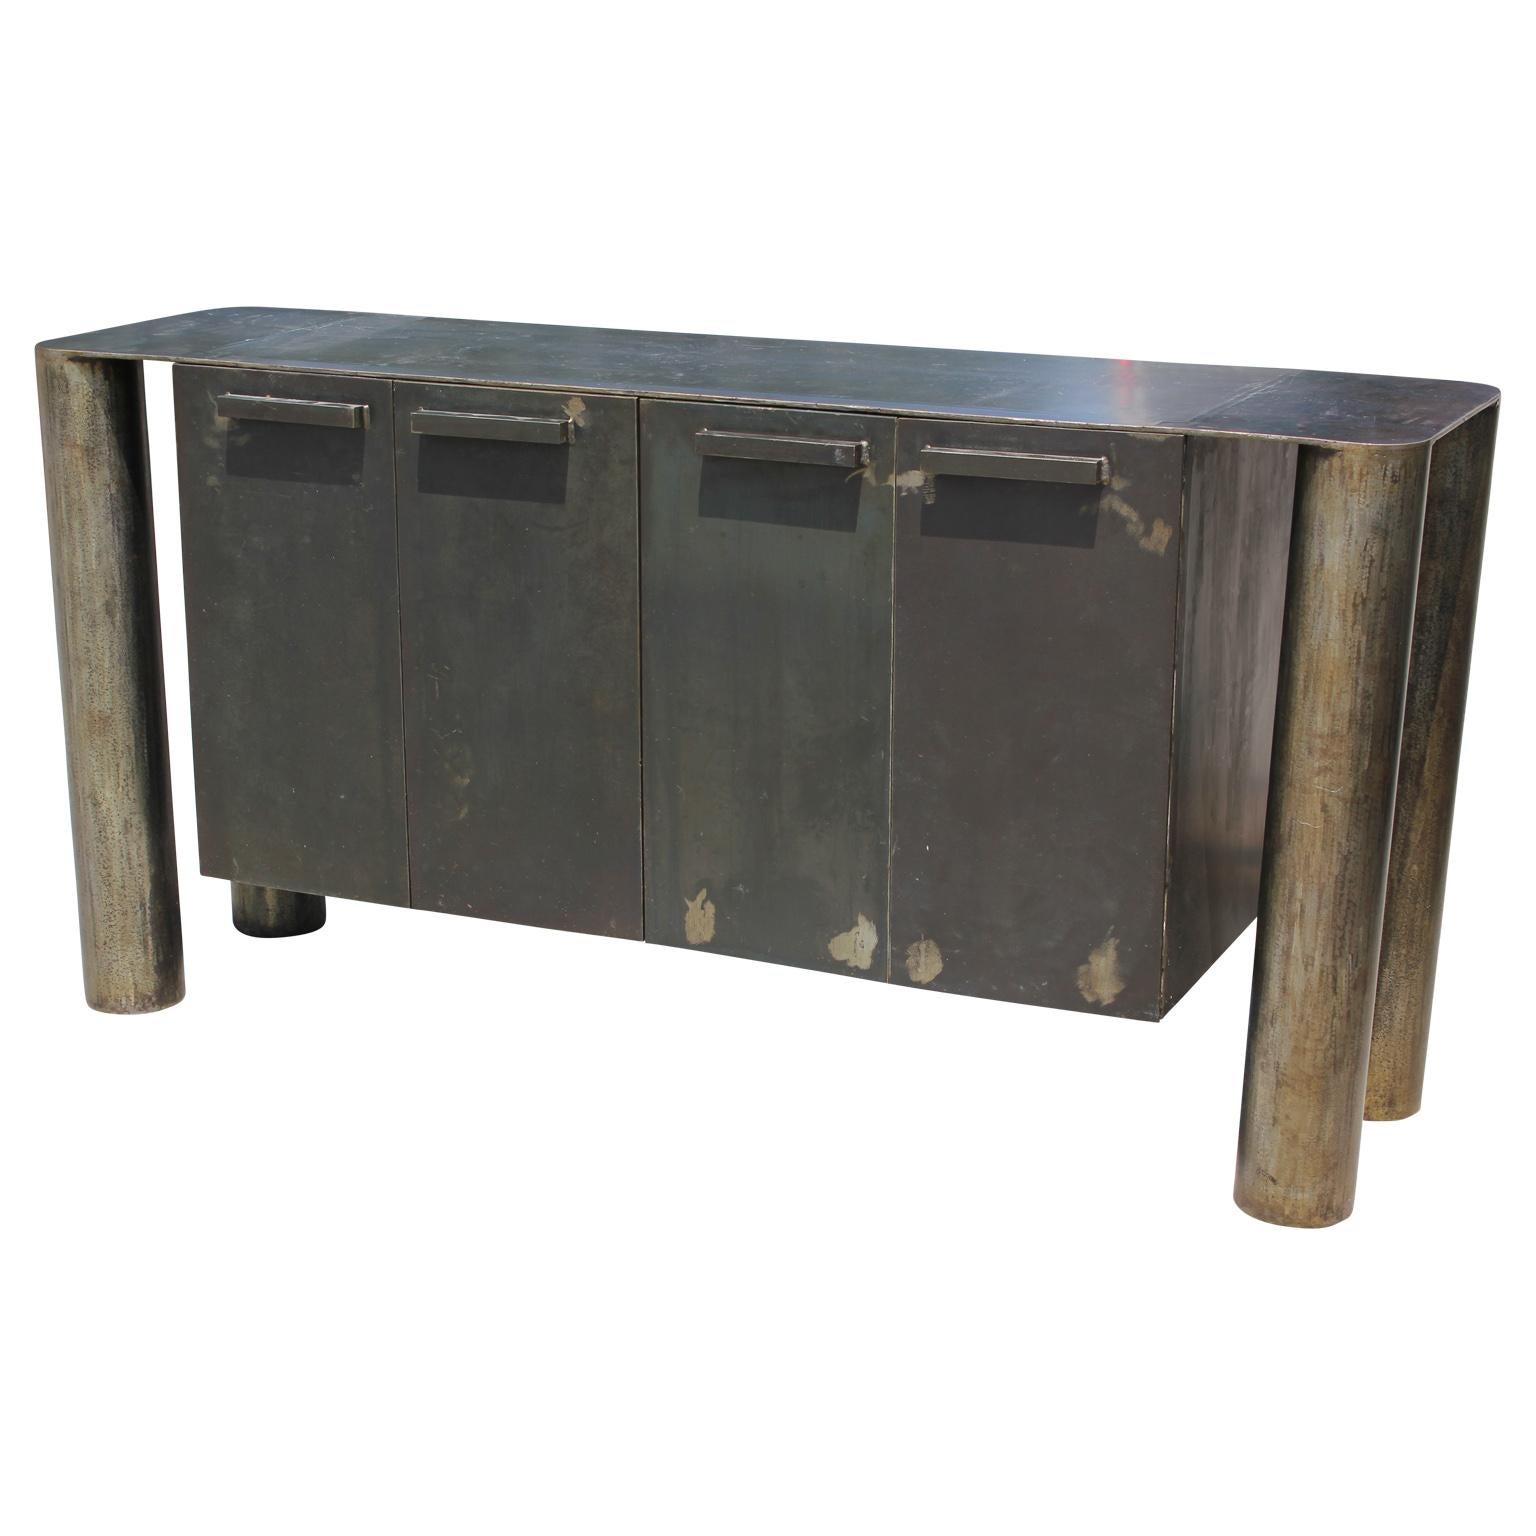 Lovely sculptural Postmodern / industrial custom-made steel credenza or sideboard. Features four open cabinet spaces. Perfect addition to any space looking for functional and artful furniture.